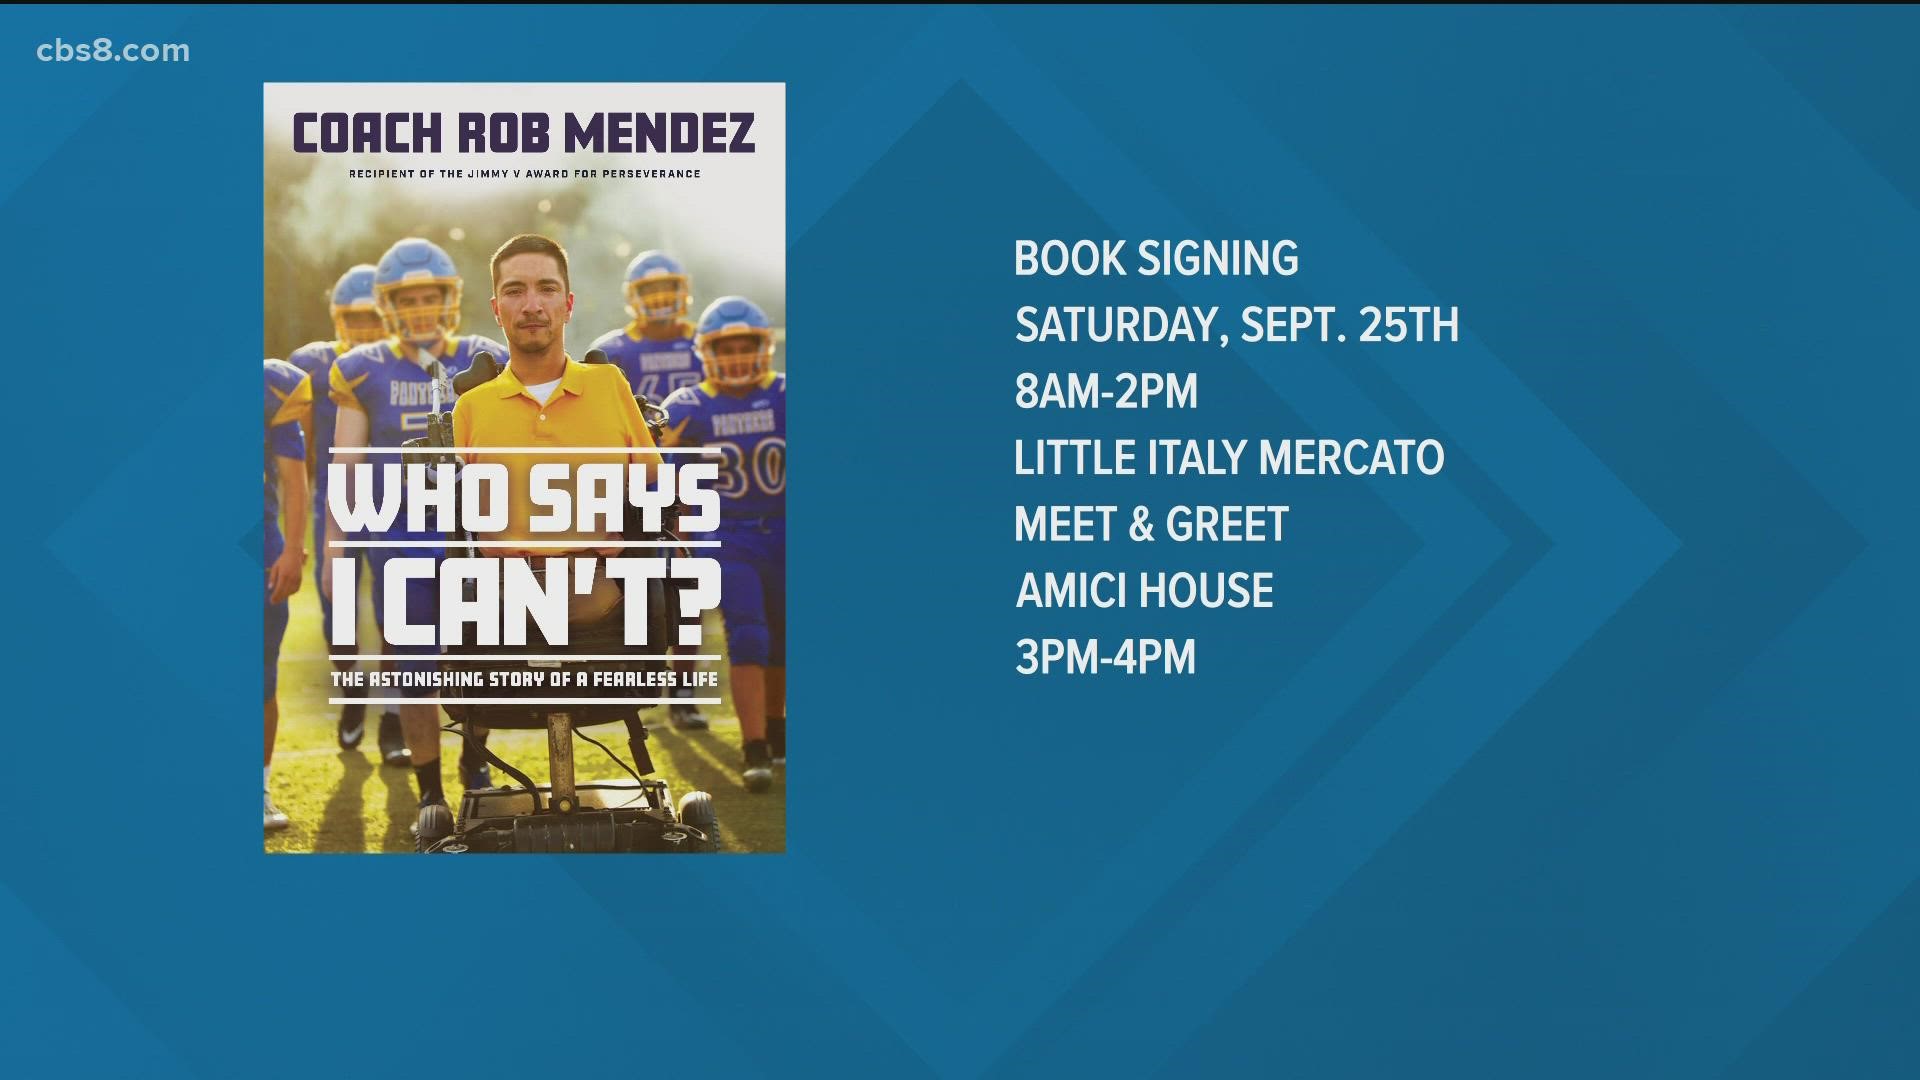 On Saturday, Sept. 25 will be doing a book signing from 8 a.m. to 2 p.m. at Little Italy Mercato followed by a meet and greet from 3 p.m. to 4 p.m. at Amici House.